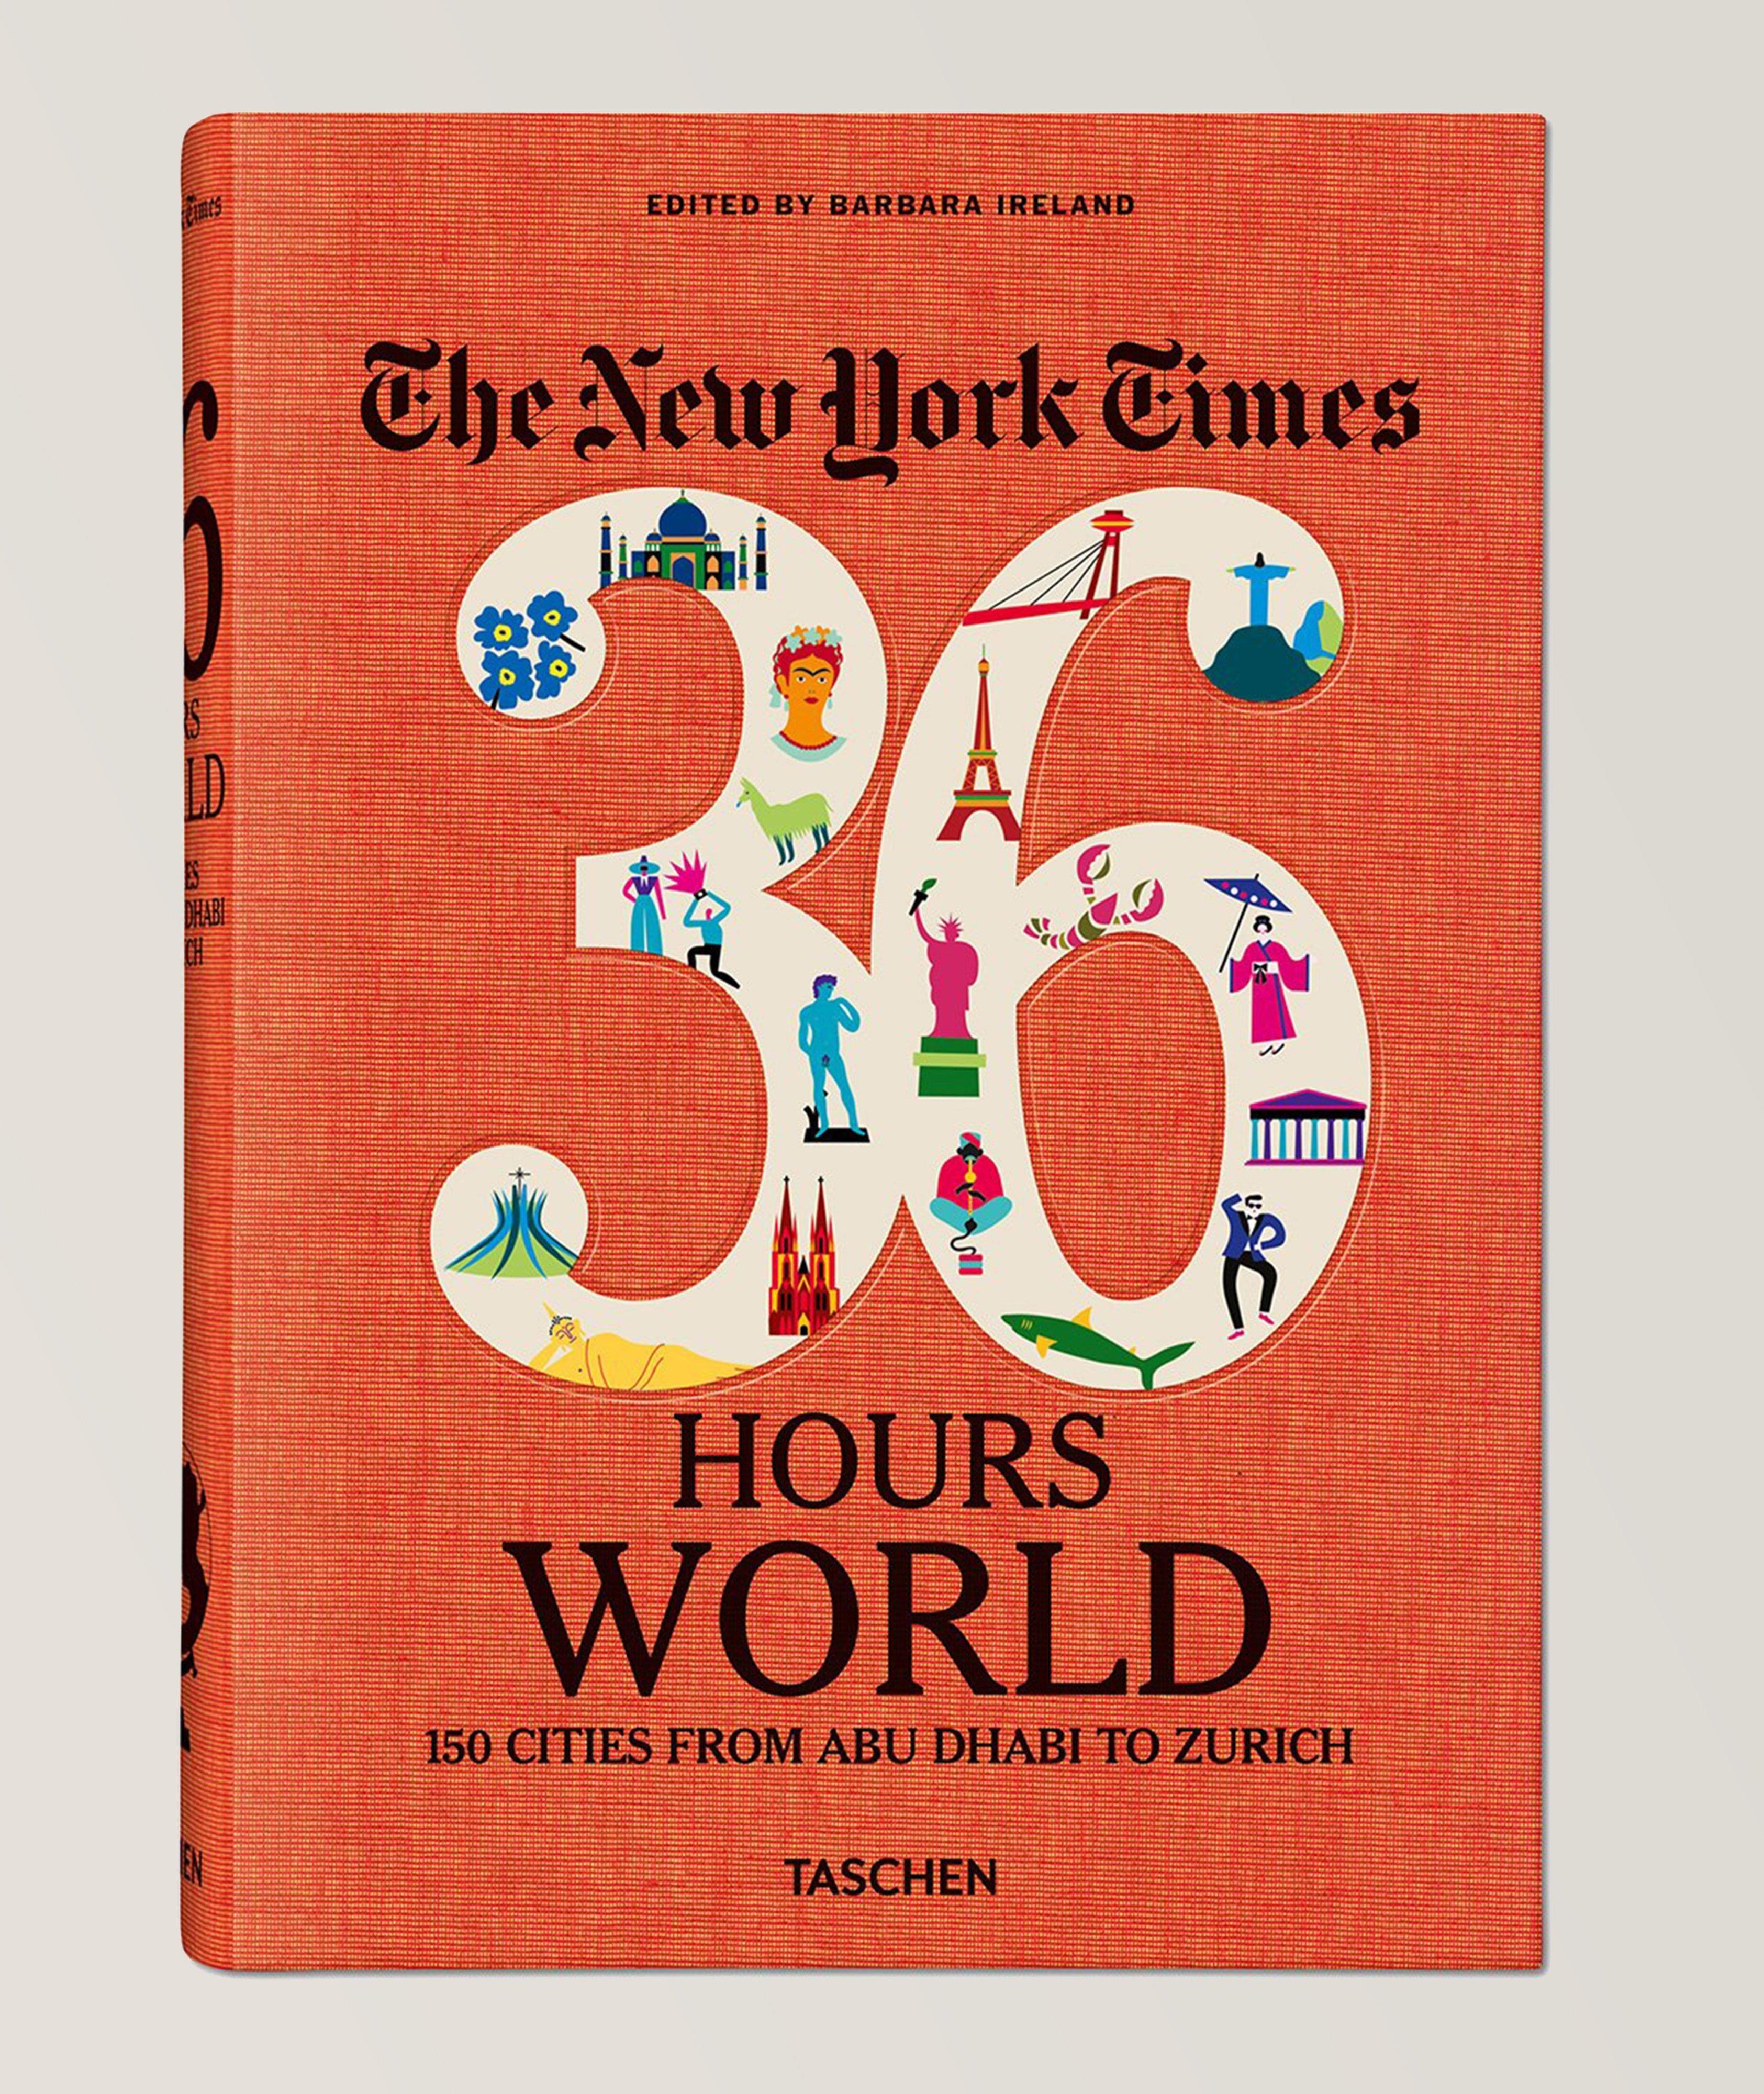 The New York Times 36 Hours, World Book image 0